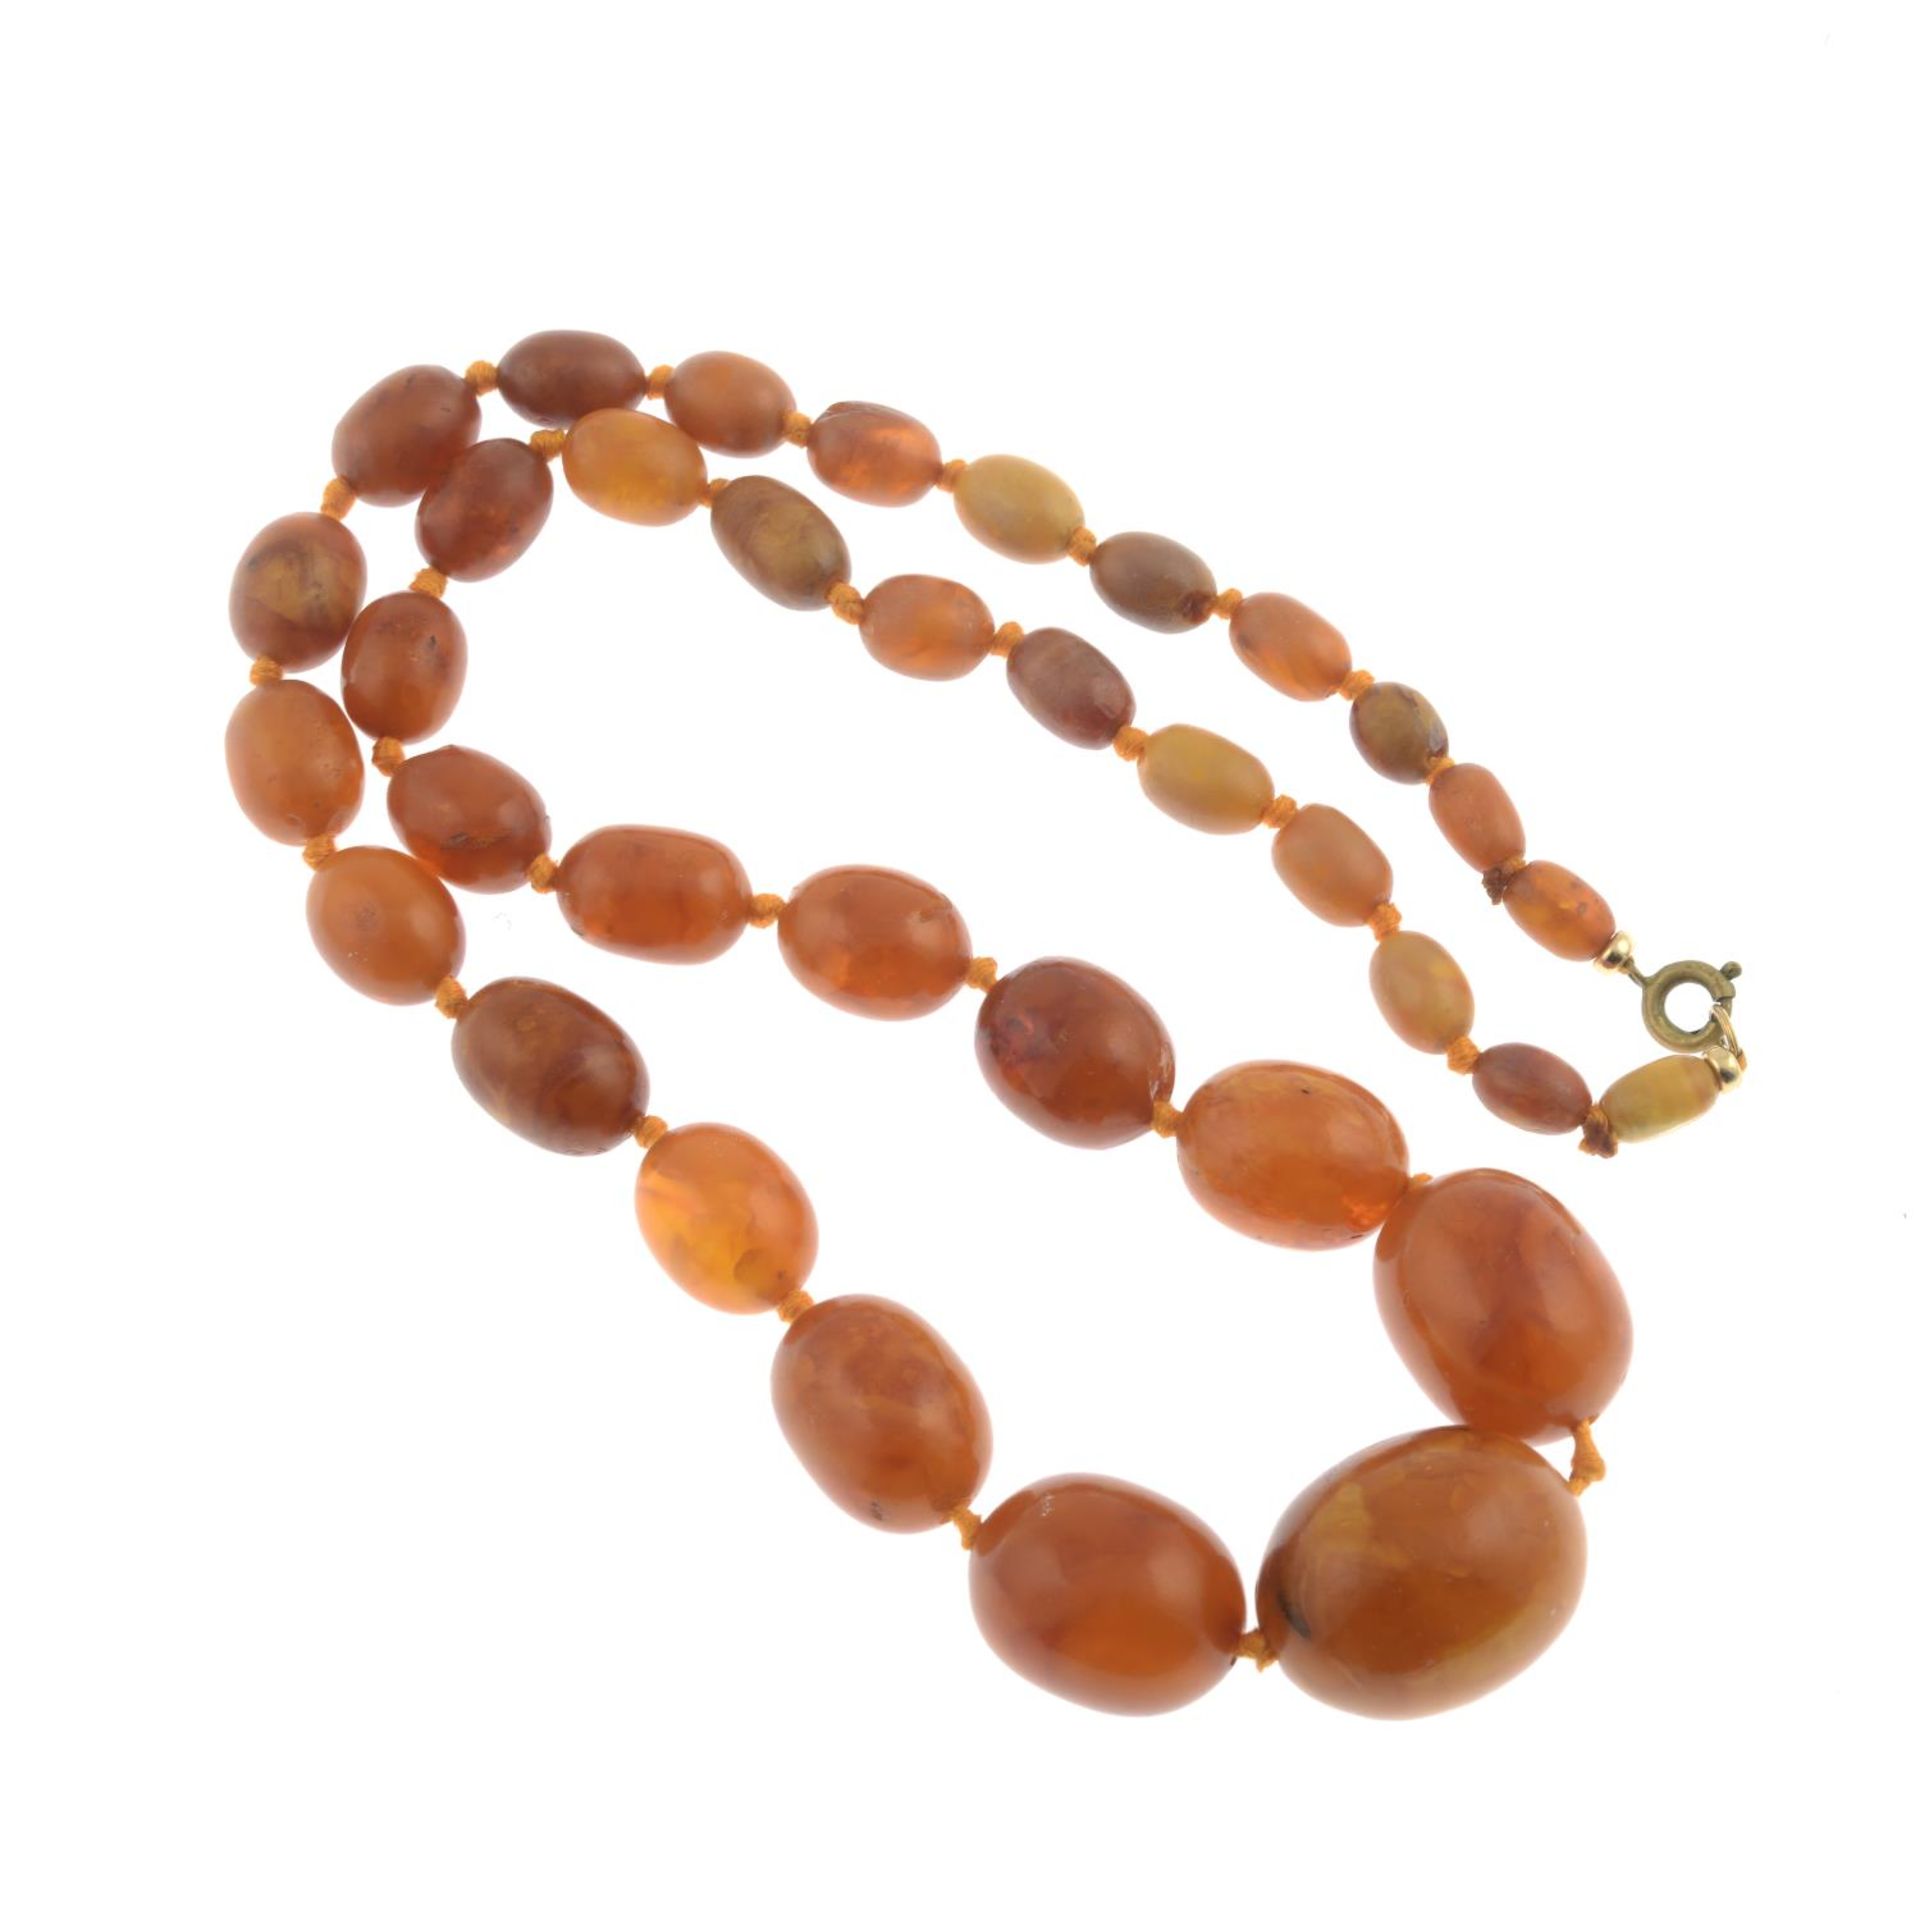 A graduated amber bead necklace.Amber is untested.Diameter of beads 0.9 to 2.6cms. - Image 2 of 2